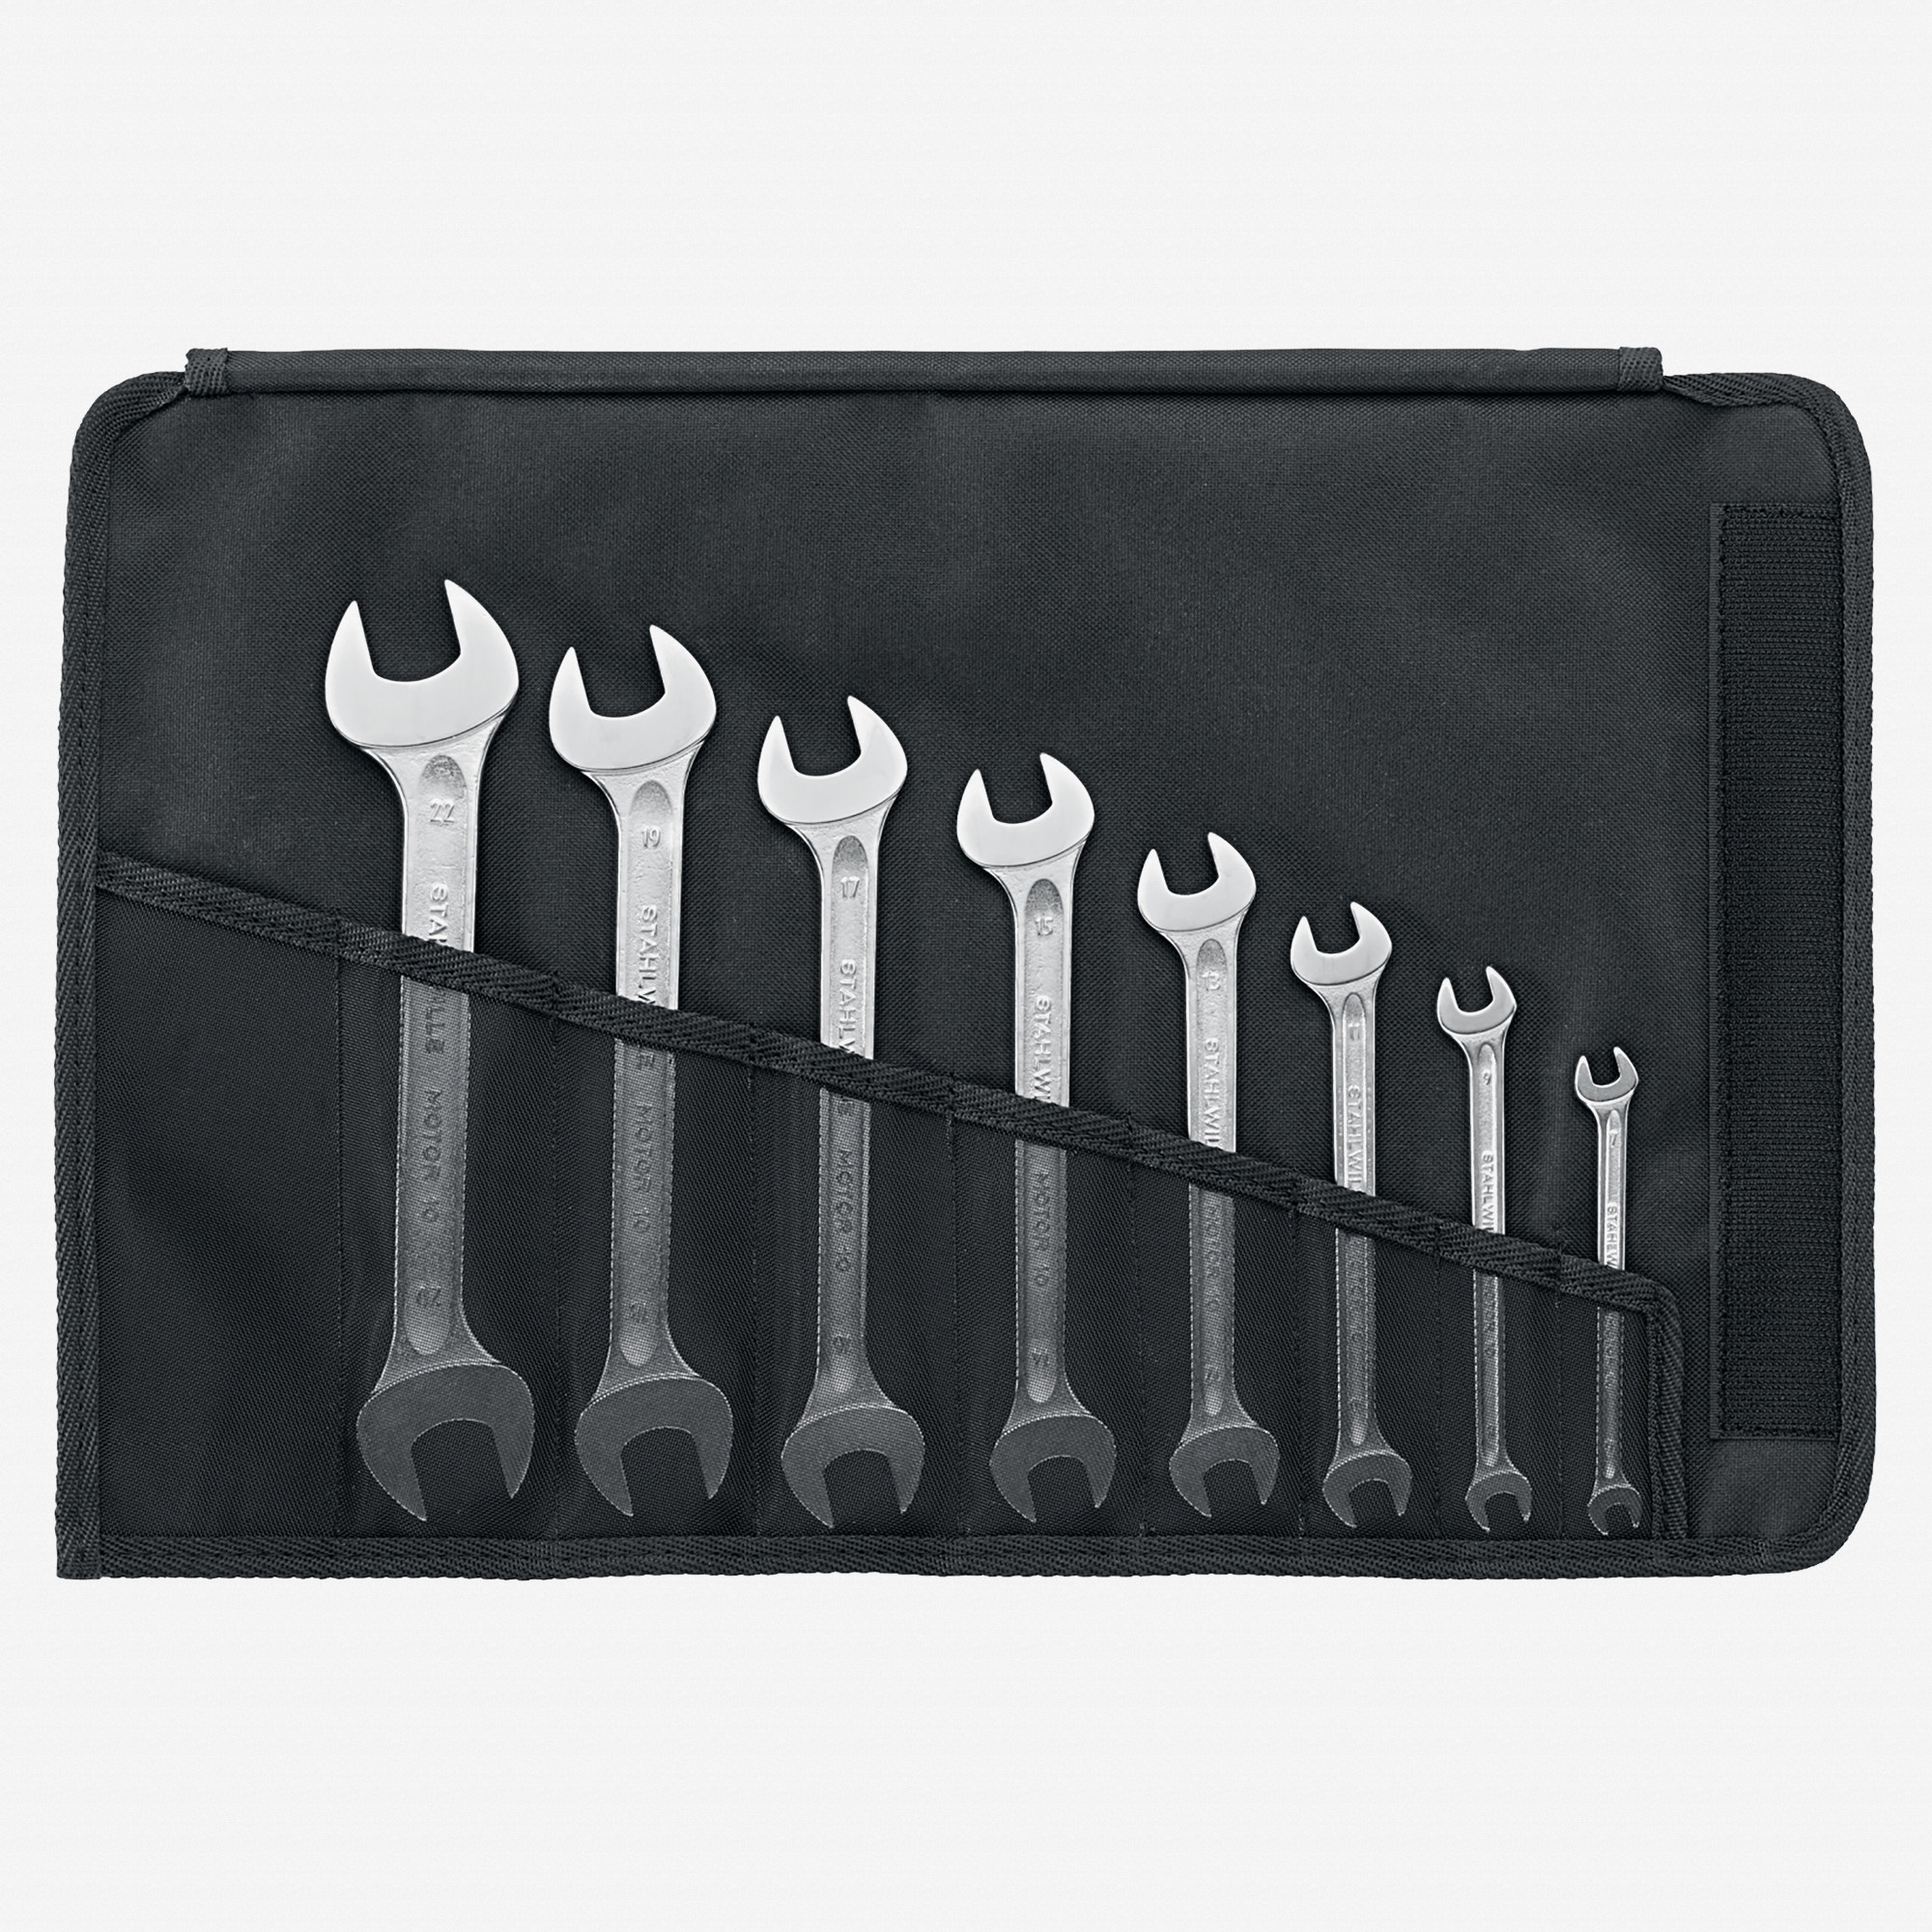 AB Tools Metric Combination Spanner Set RingOpen Ended 6-32mm India | Ubuy